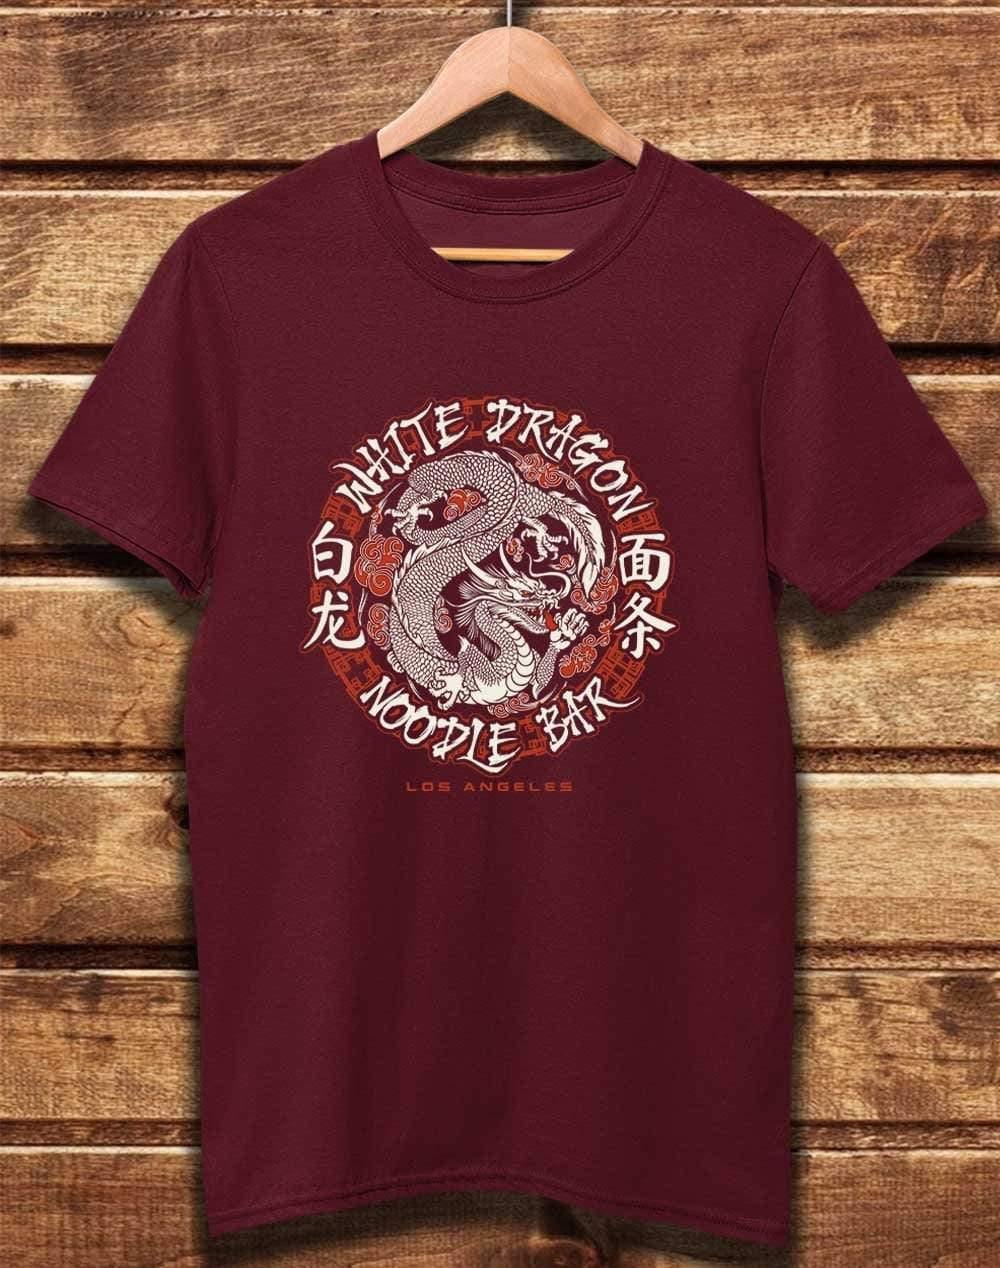 DELUXE White Dragon Noodle Bar Organic Cotton T-Shirt XS / Burgundy  - Off World Tees